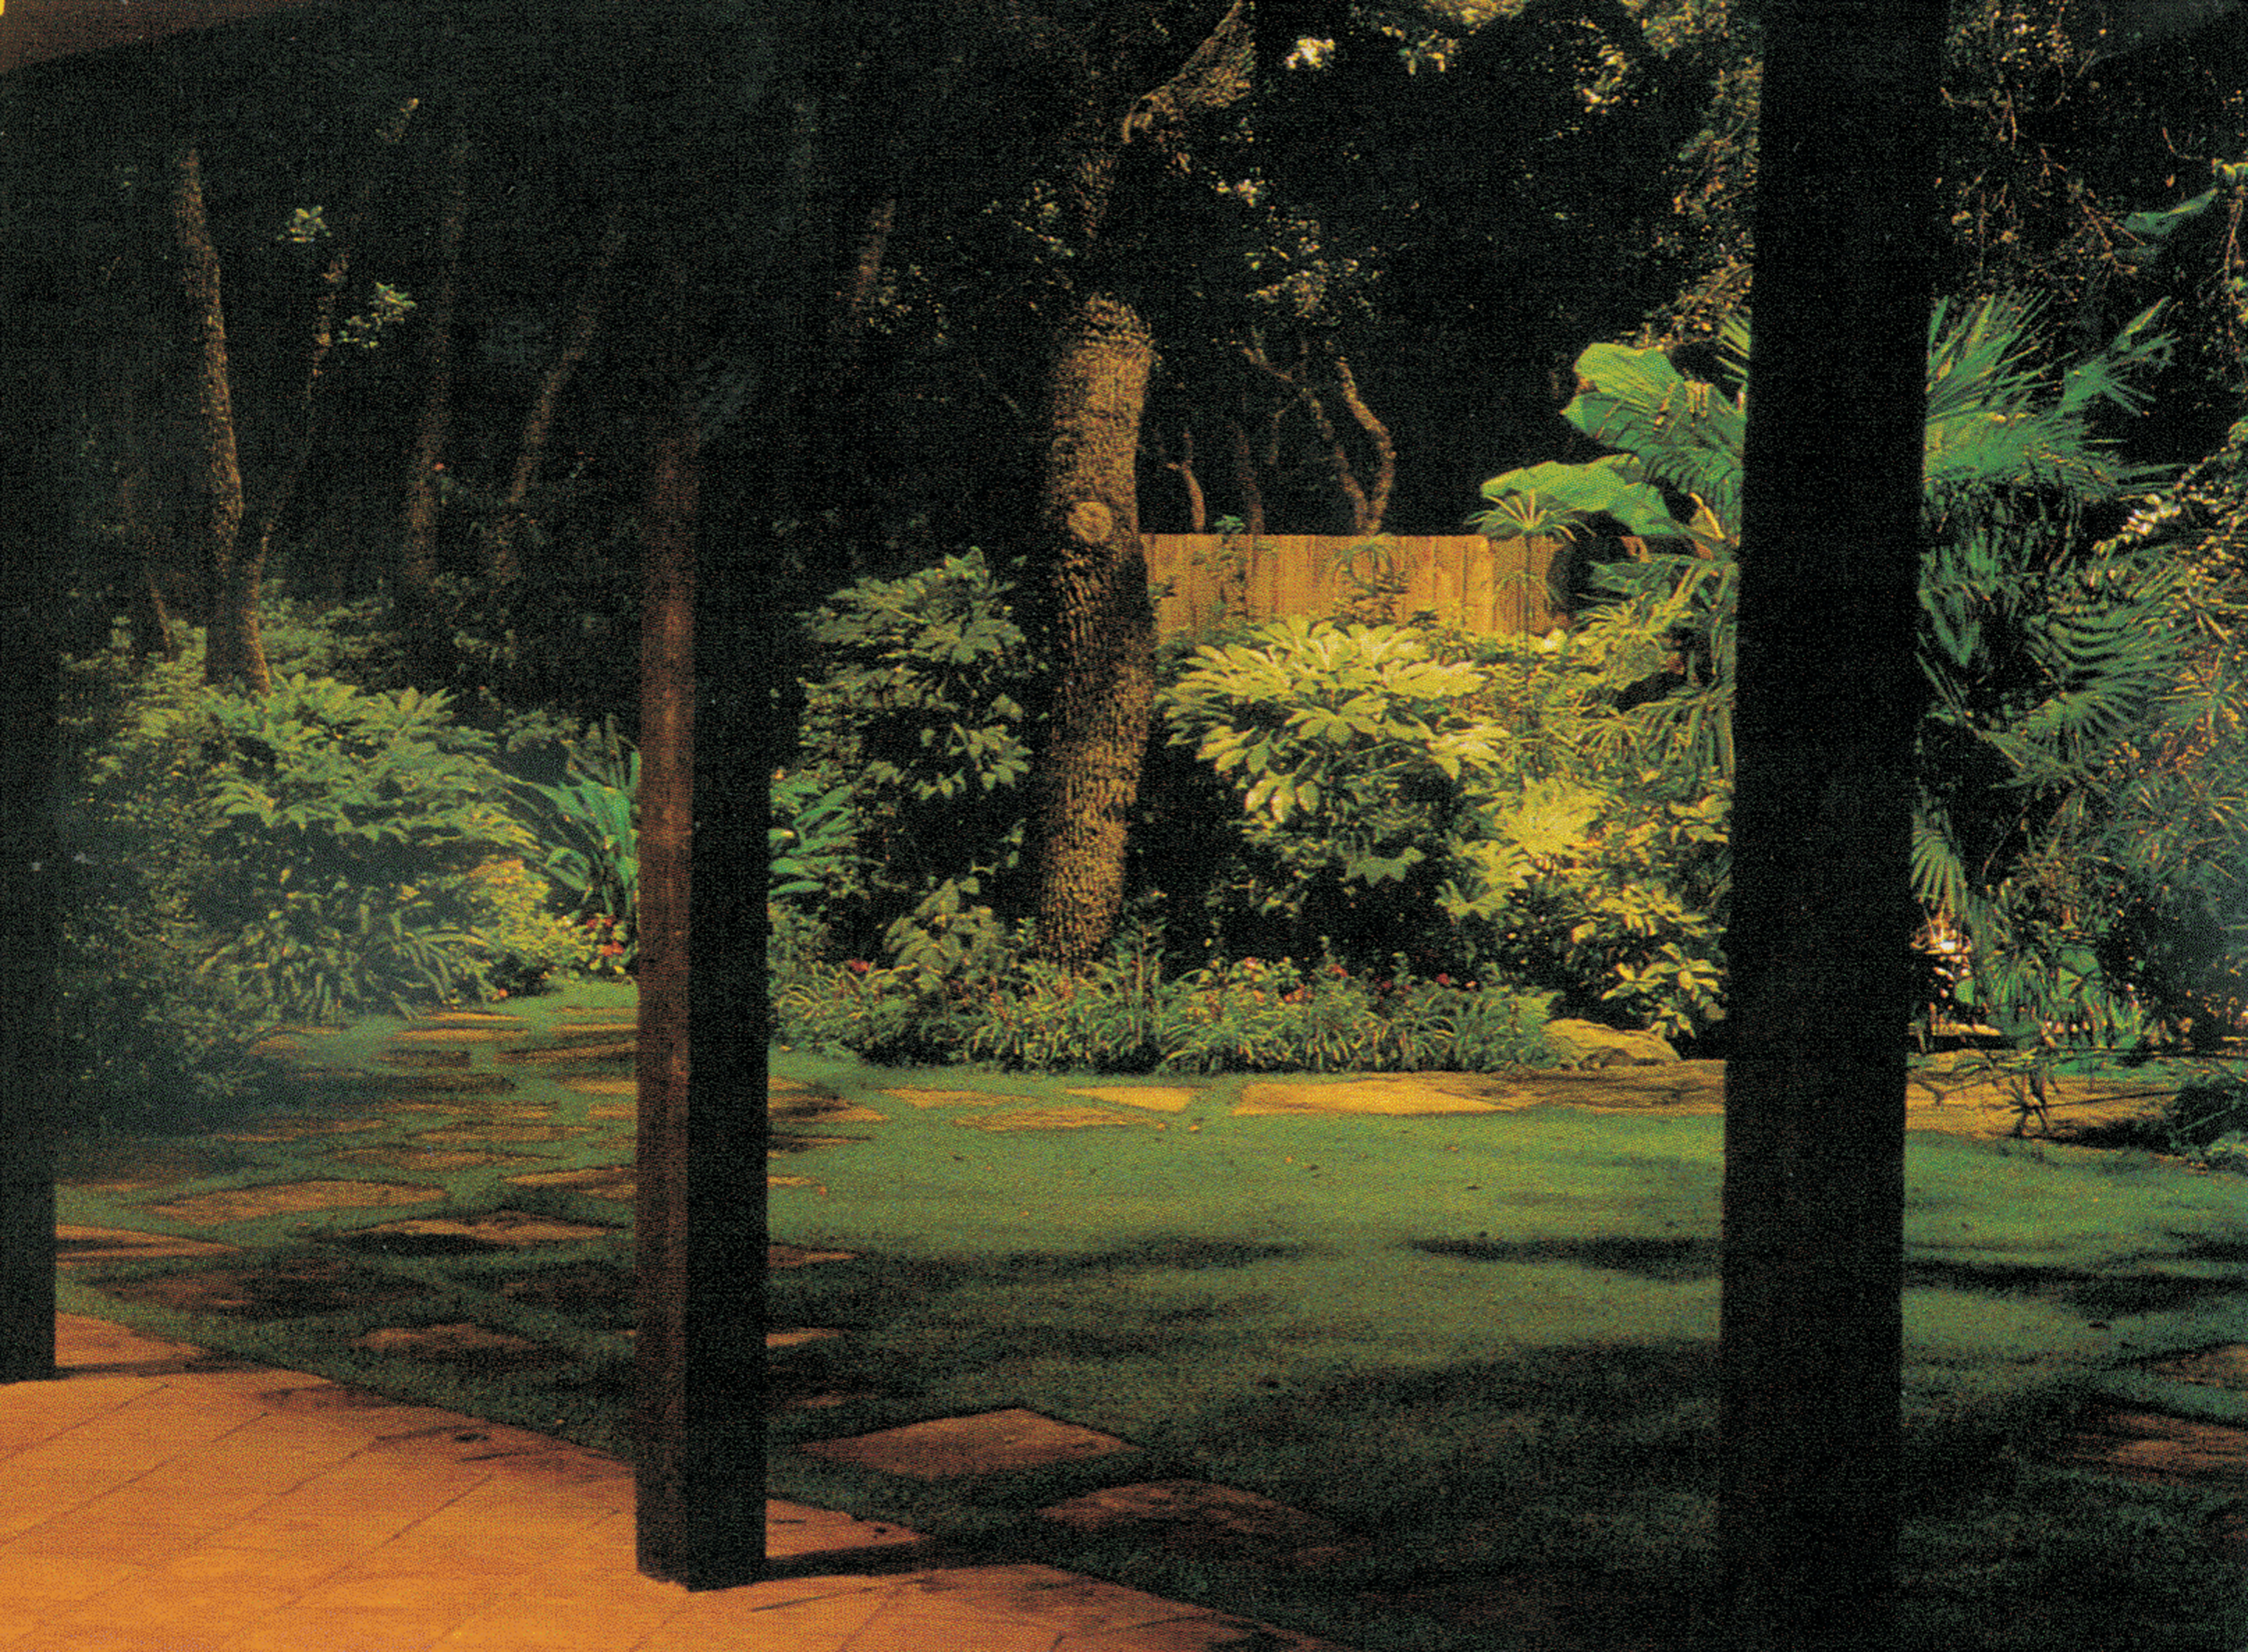 a yard in the night with trees in the foreground and a lit path behind the trees